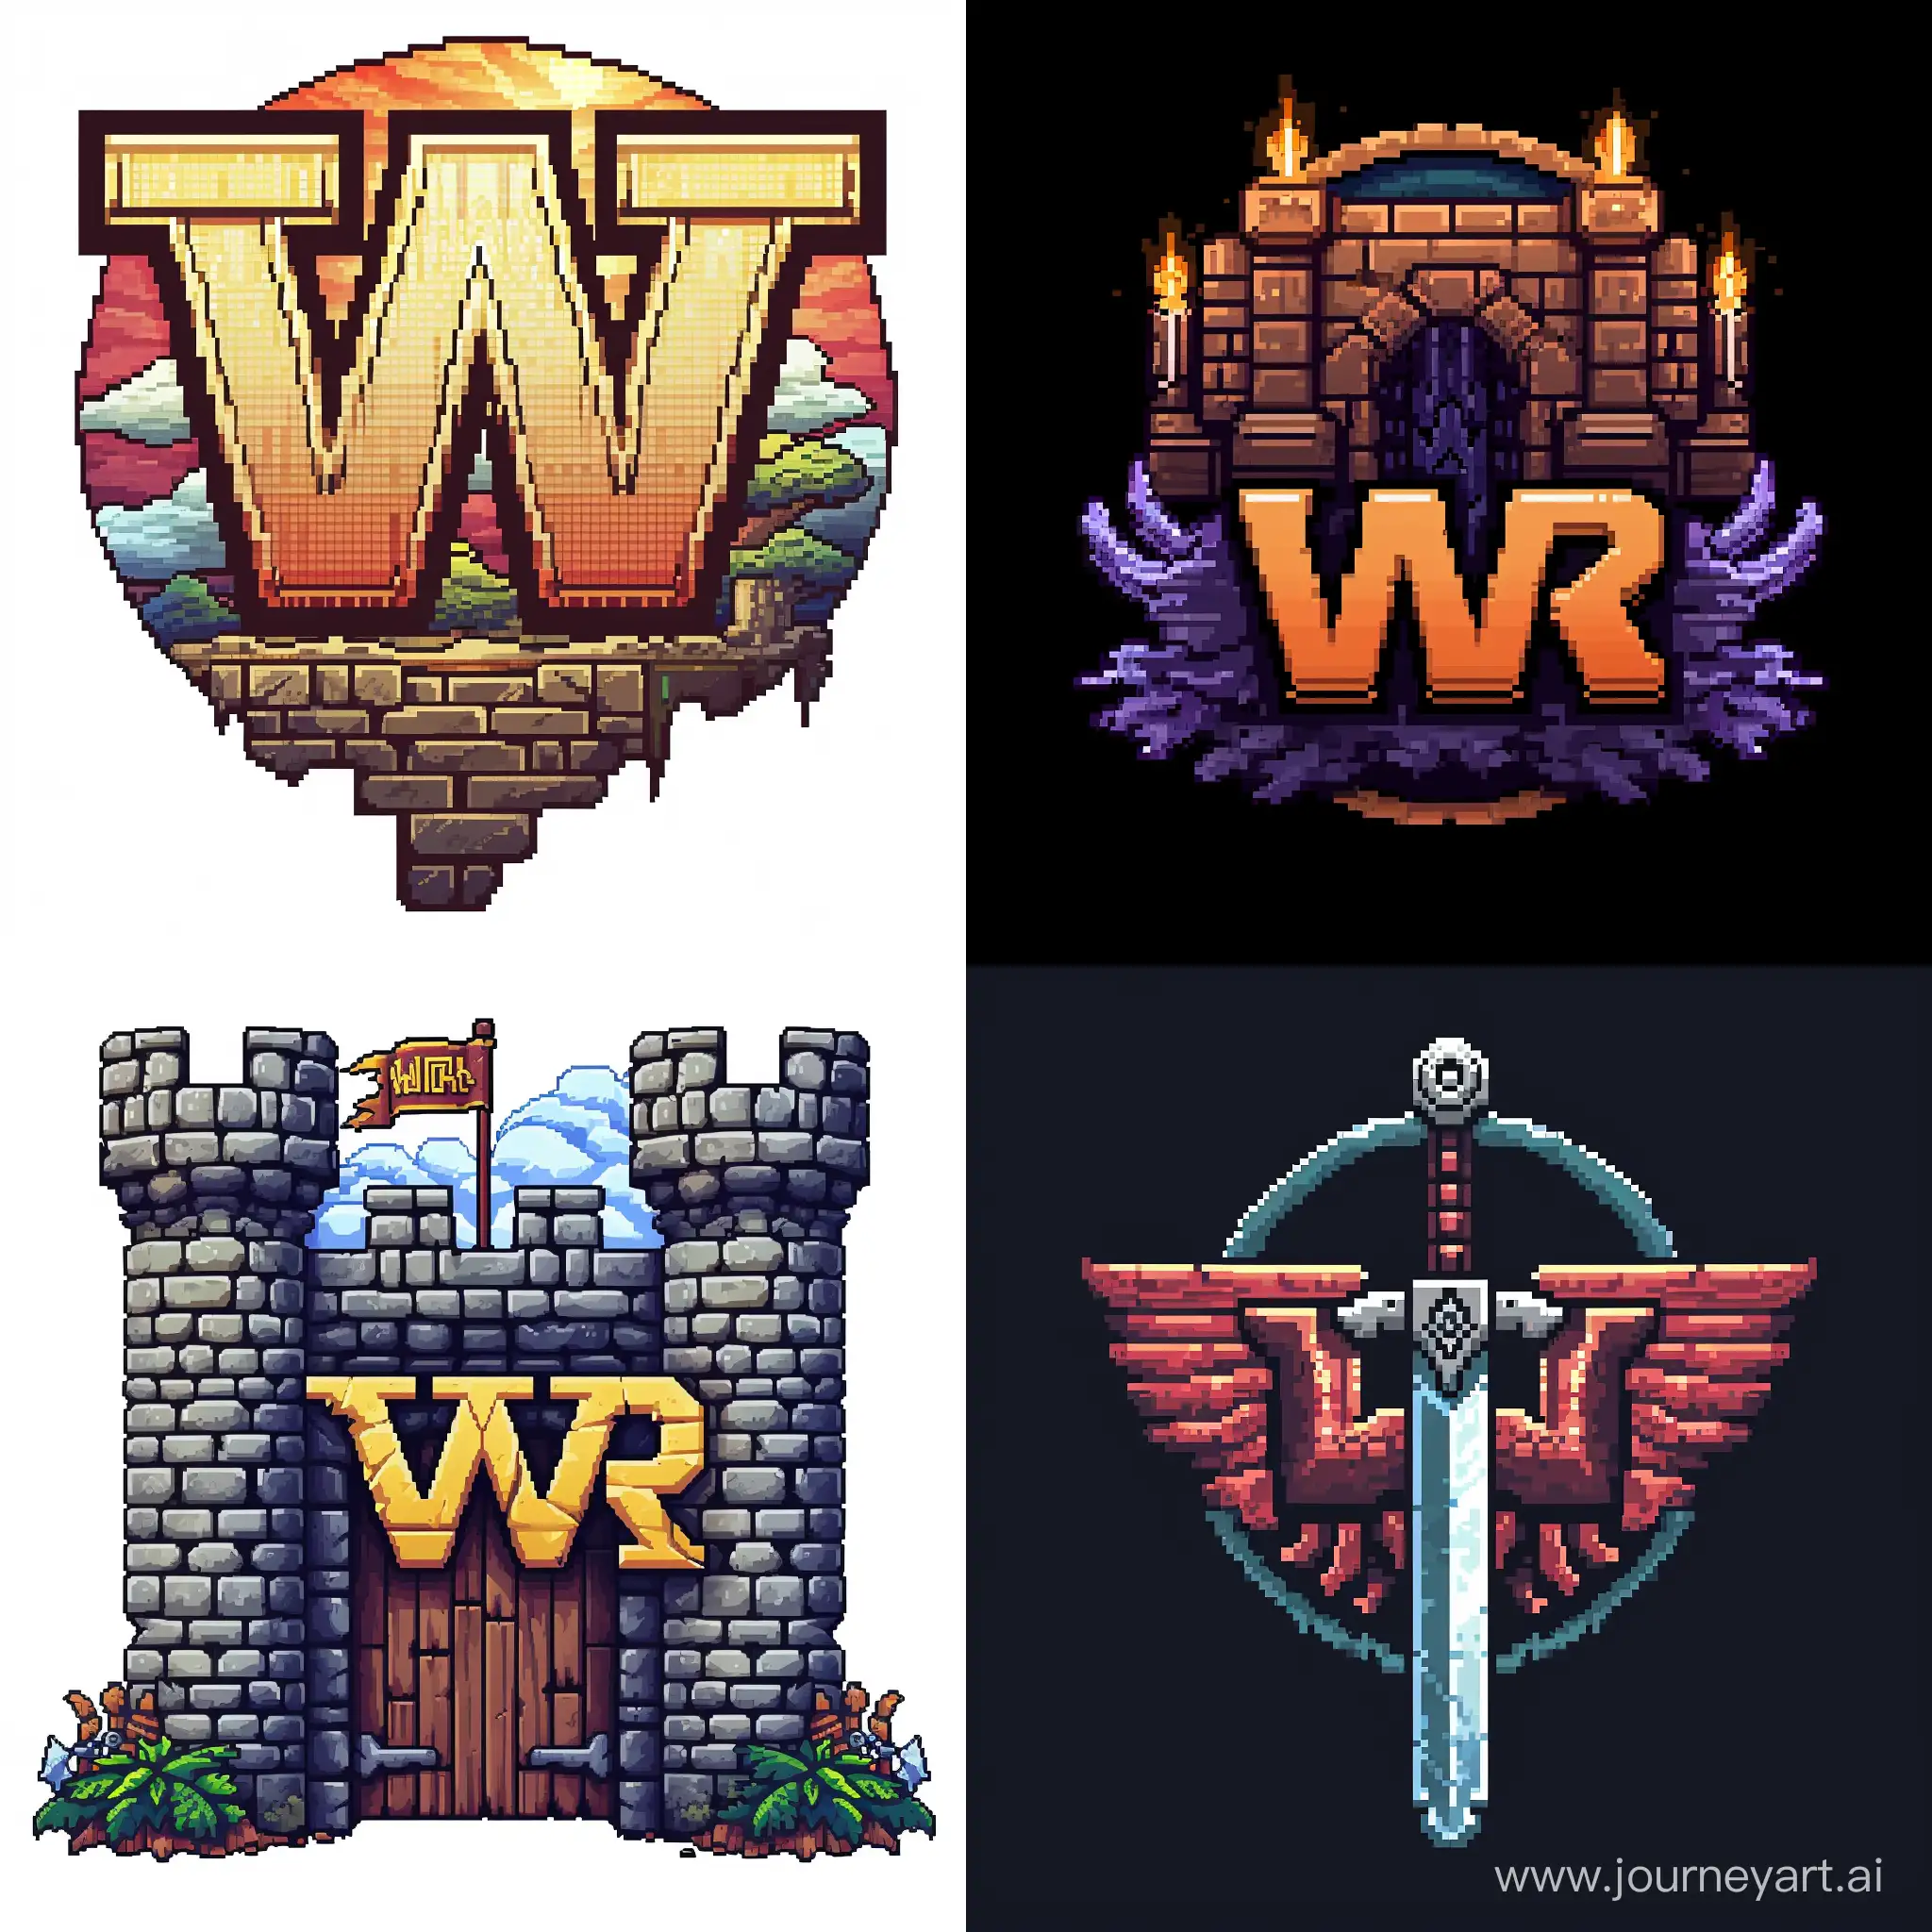 Pixelated-WR-Logo-in-RPG-Pixel-Realm